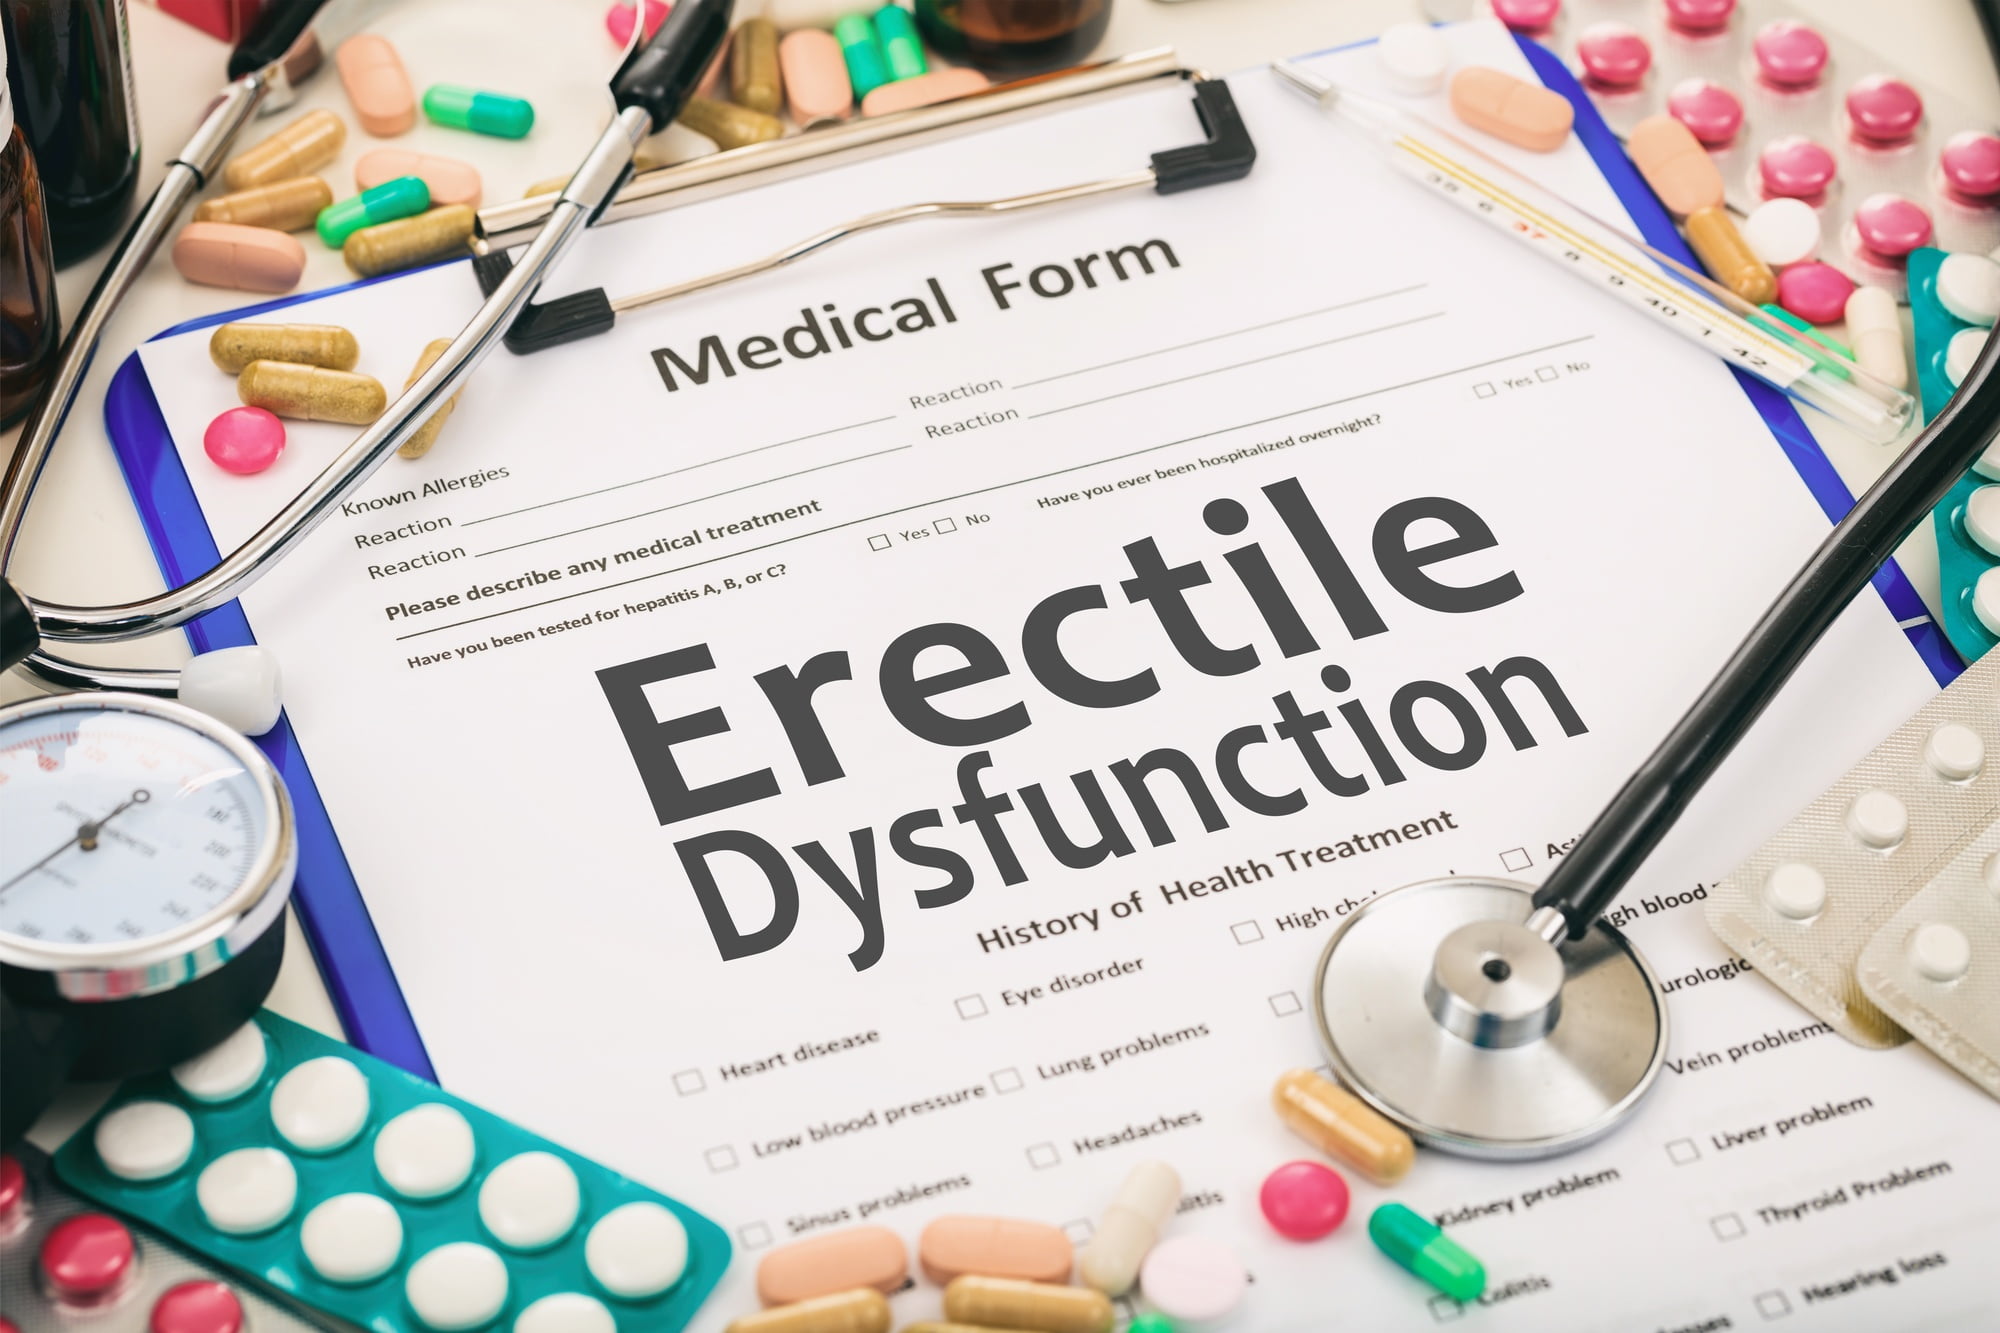 Examination and erectile dysfunction tests focusing on your genitals are often done to check for ED. Here's what tests your urologist will perform.